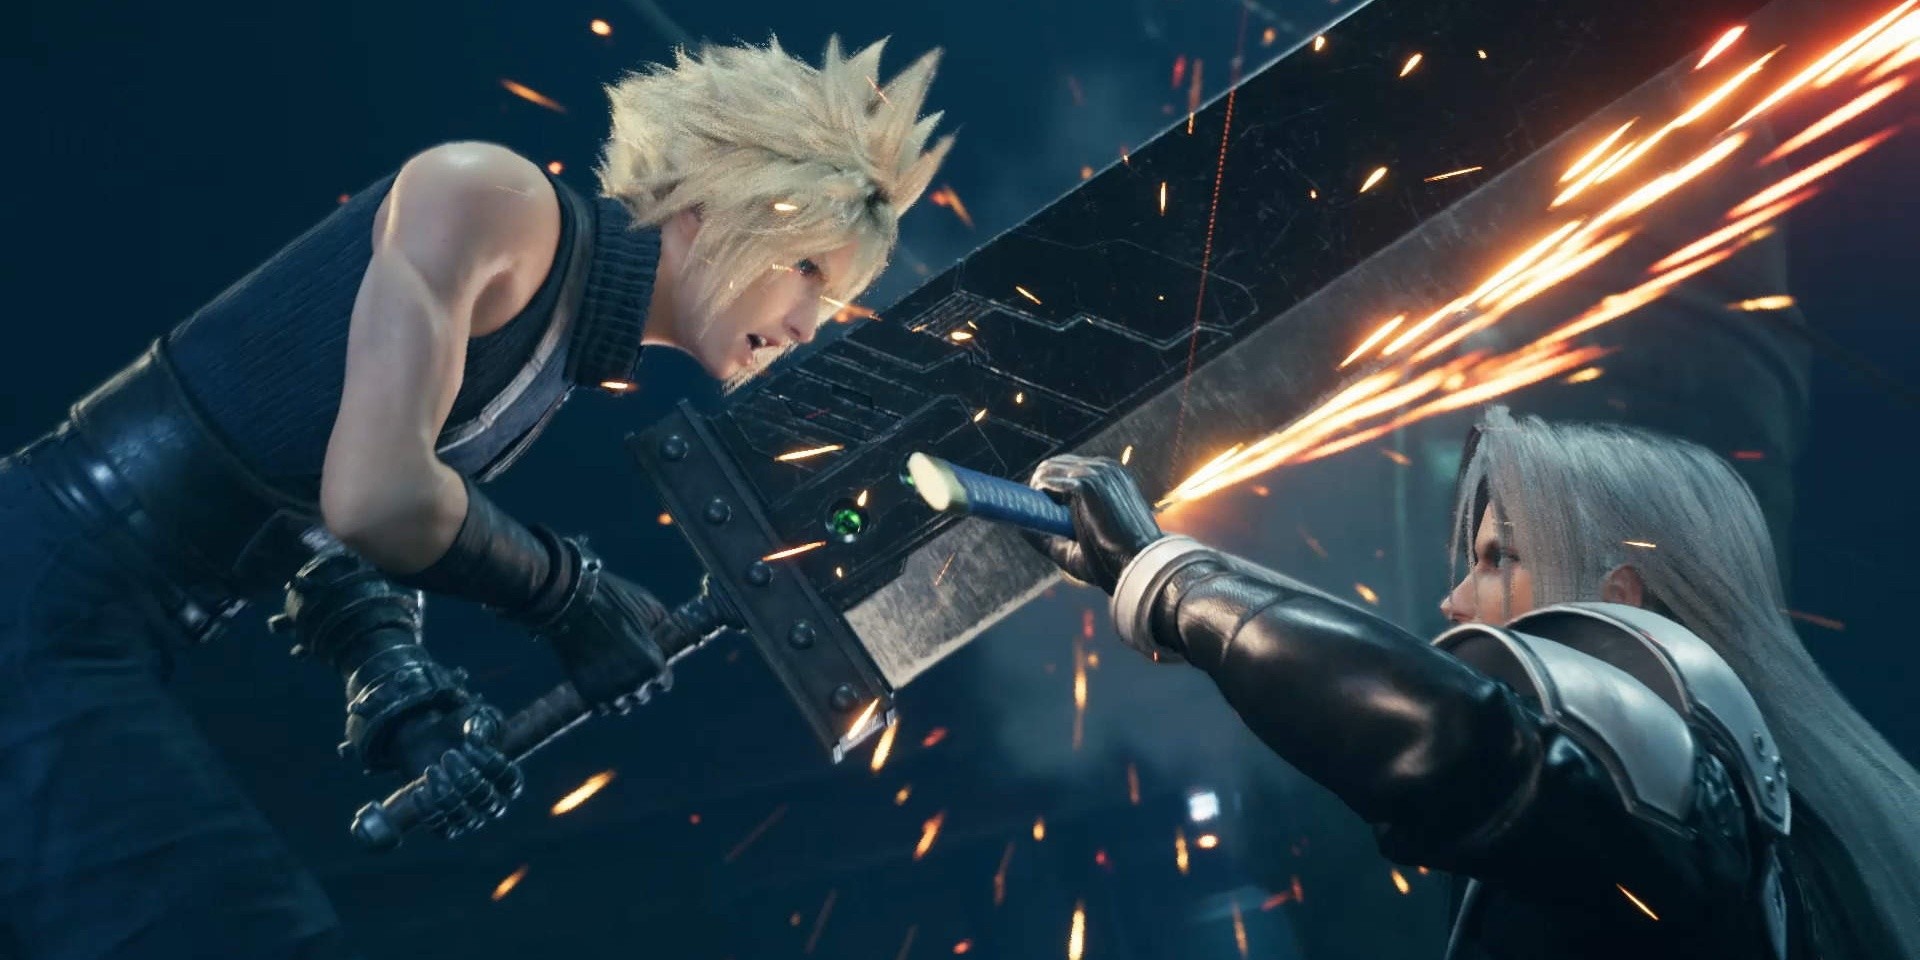 Final Fantasy VII Remake wins Best Score and Music at the Game Awards 2020